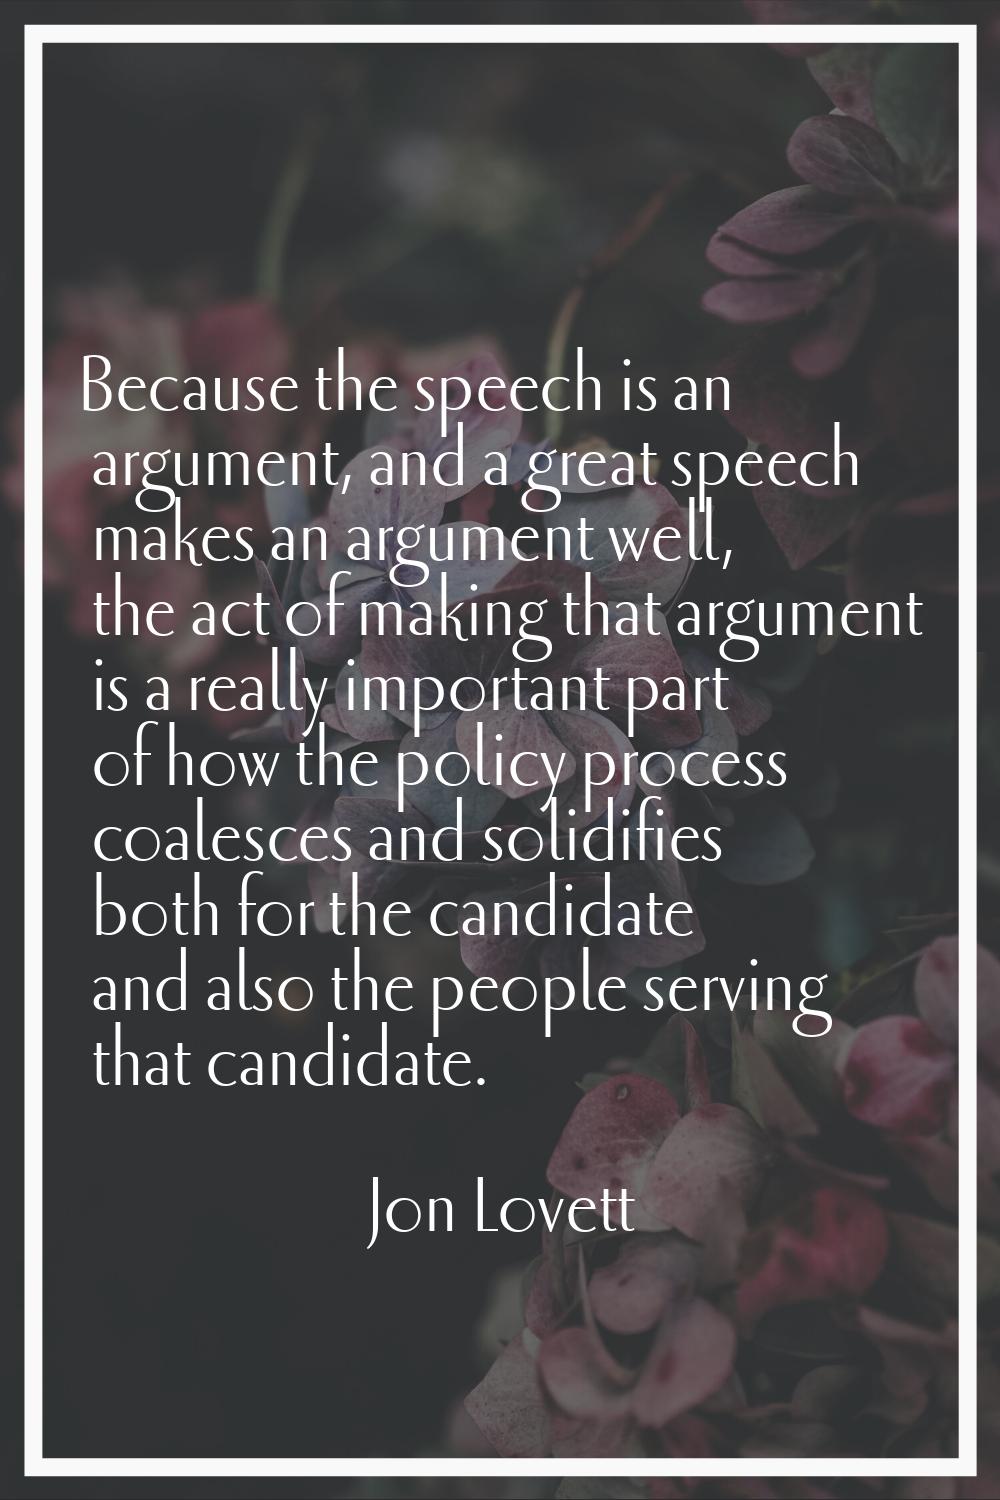 Because the speech is an argument, and a great speech makes an argument well, the act of making tha